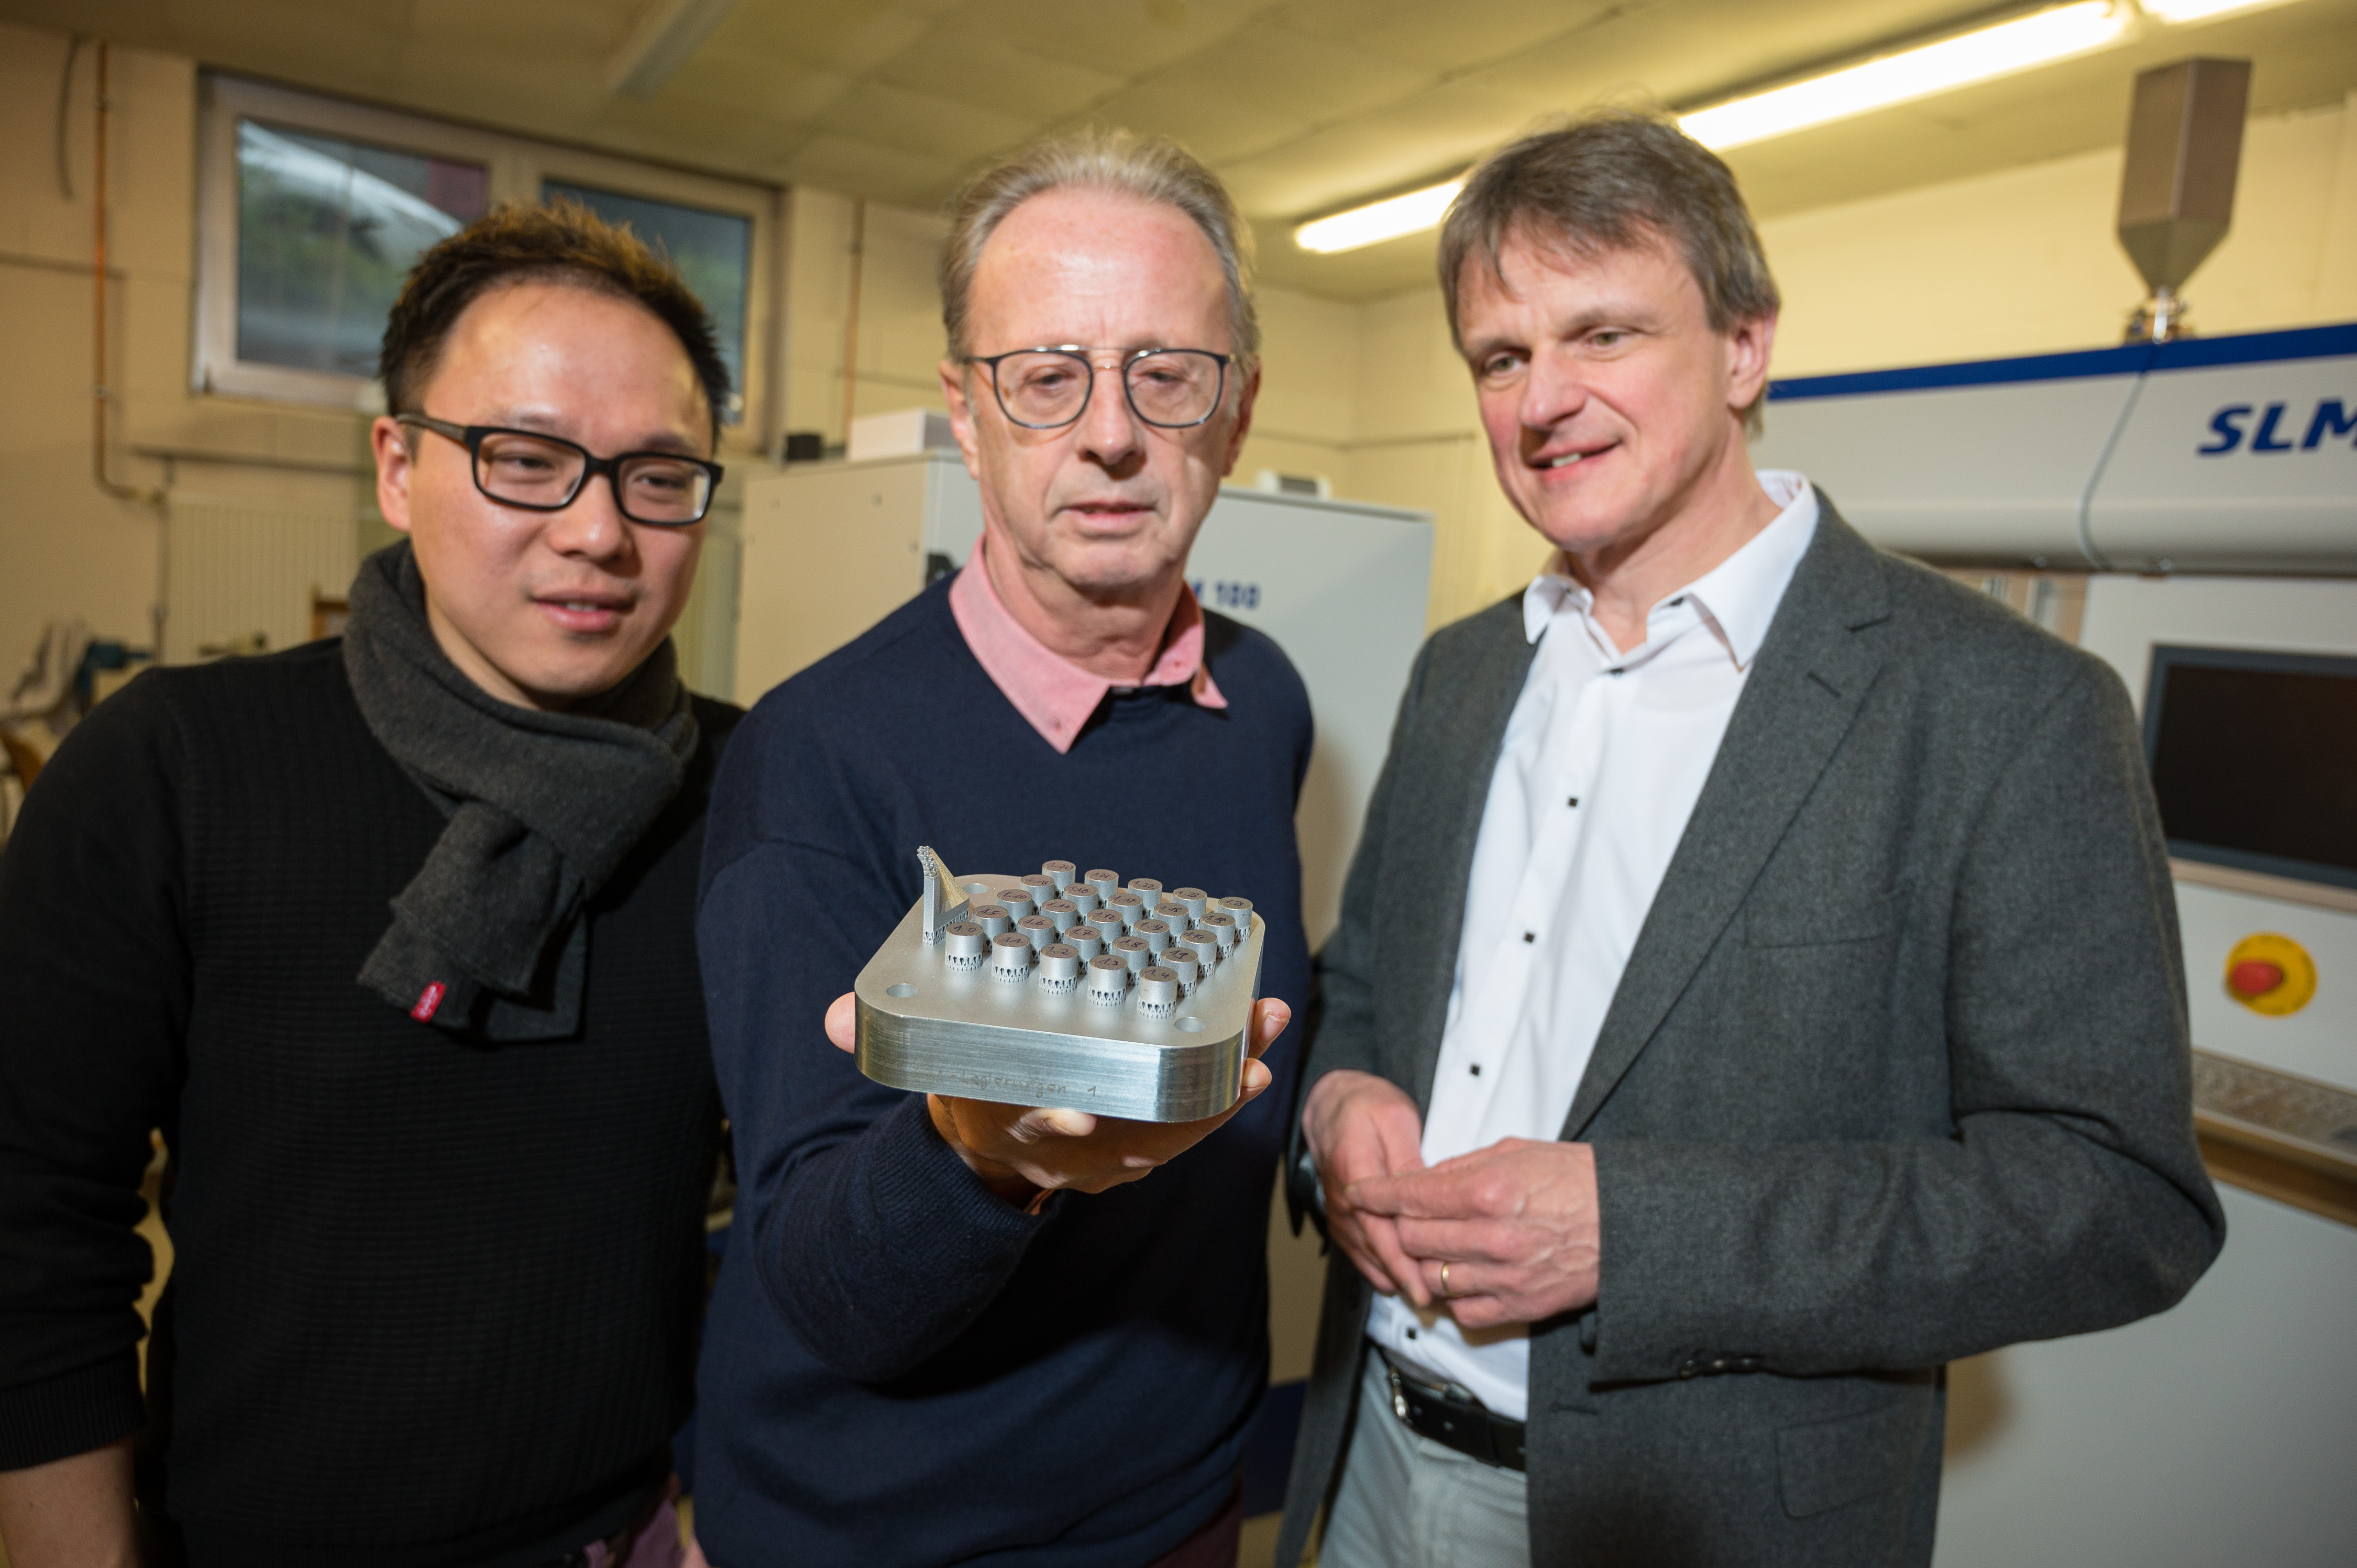 Professor Dirk Bähre (right), here with the researcher Shiqi Fang (left) and the technical assistant Stefan Wilhelm (center) from his research group. Photo via Saarland University.